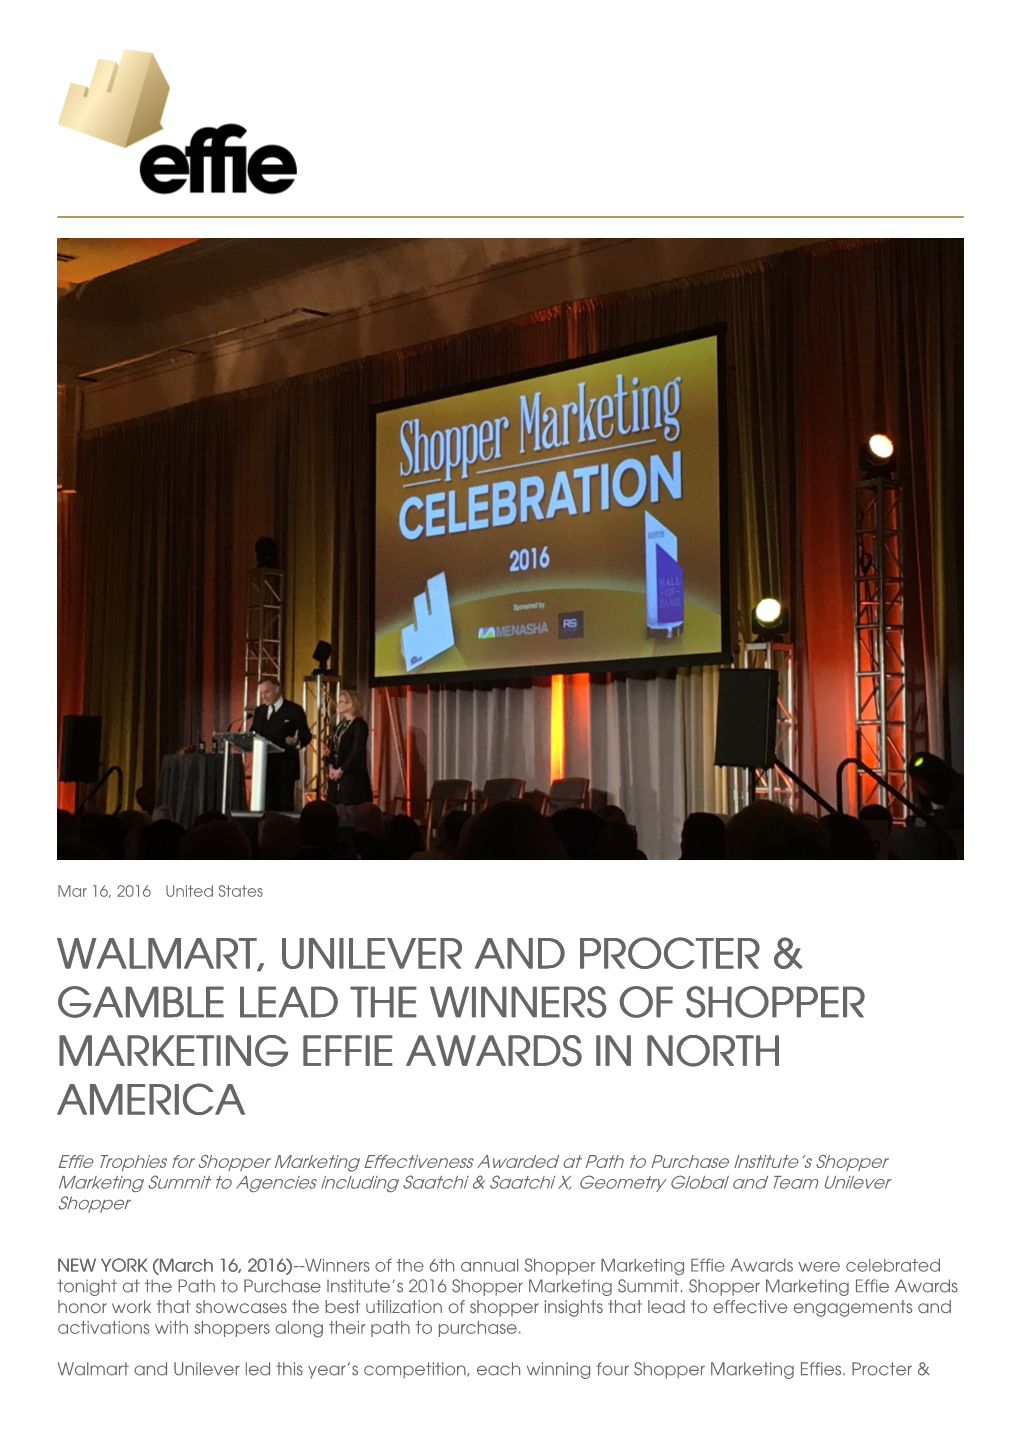 Walmart, Unilever and Procter & Gamble Lead the Winners of Shopper